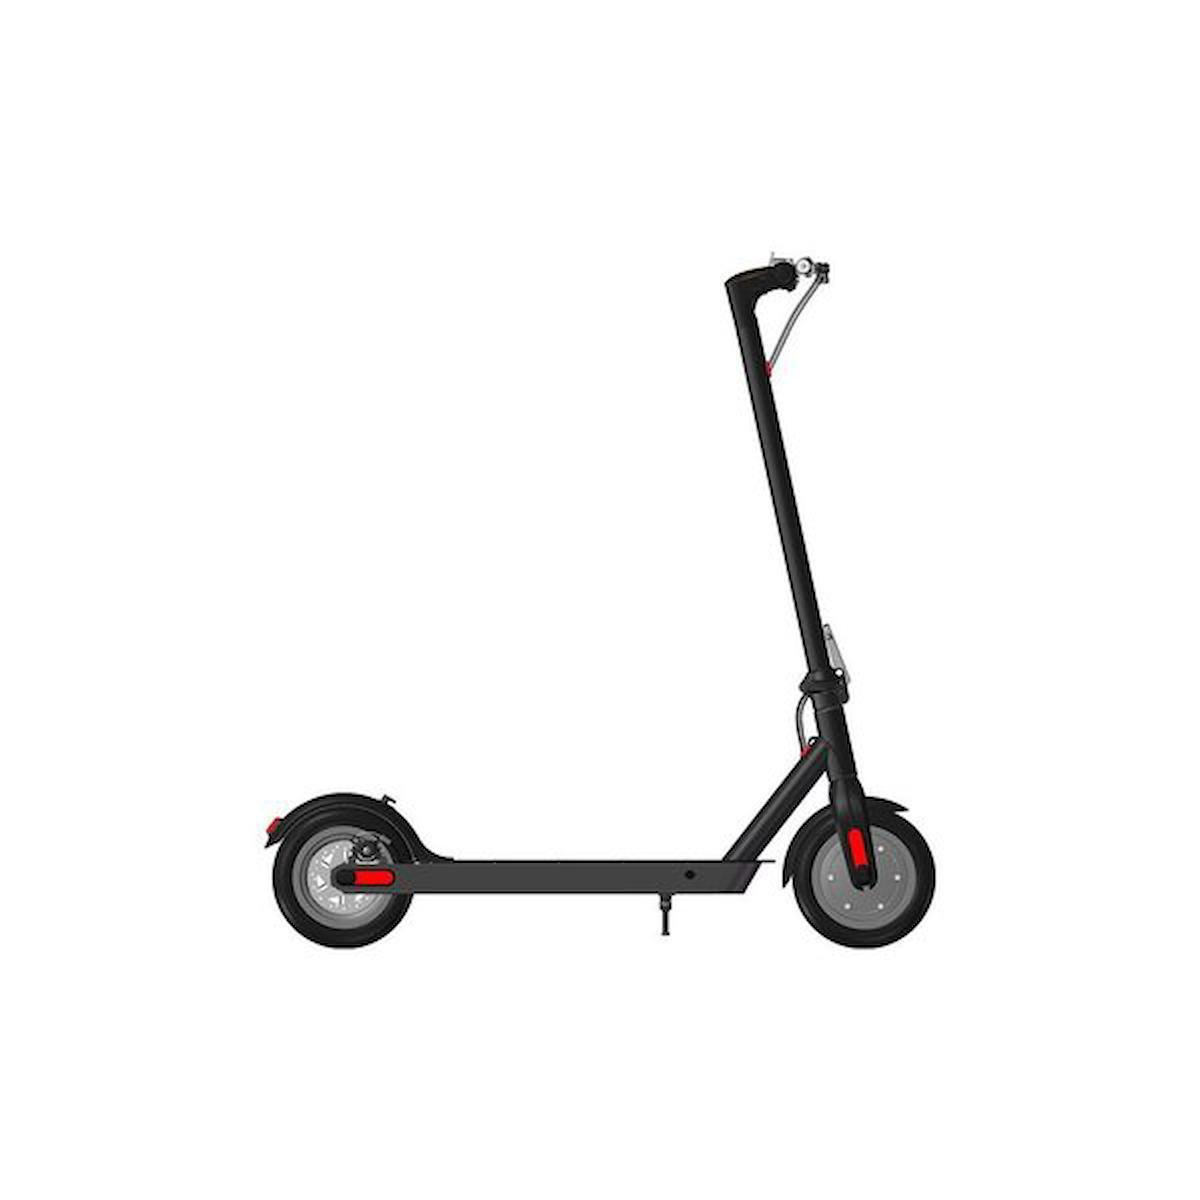 Xiaomi mijia electric scooter 1s. Электросамокат Ninebot Electric Scooter Max g30. Электросамокат Xiaomi Electric Scooter 3 Lite. Ninebot KICKSCOOTER e22. Ninebot Electric Scooter g30lp us.